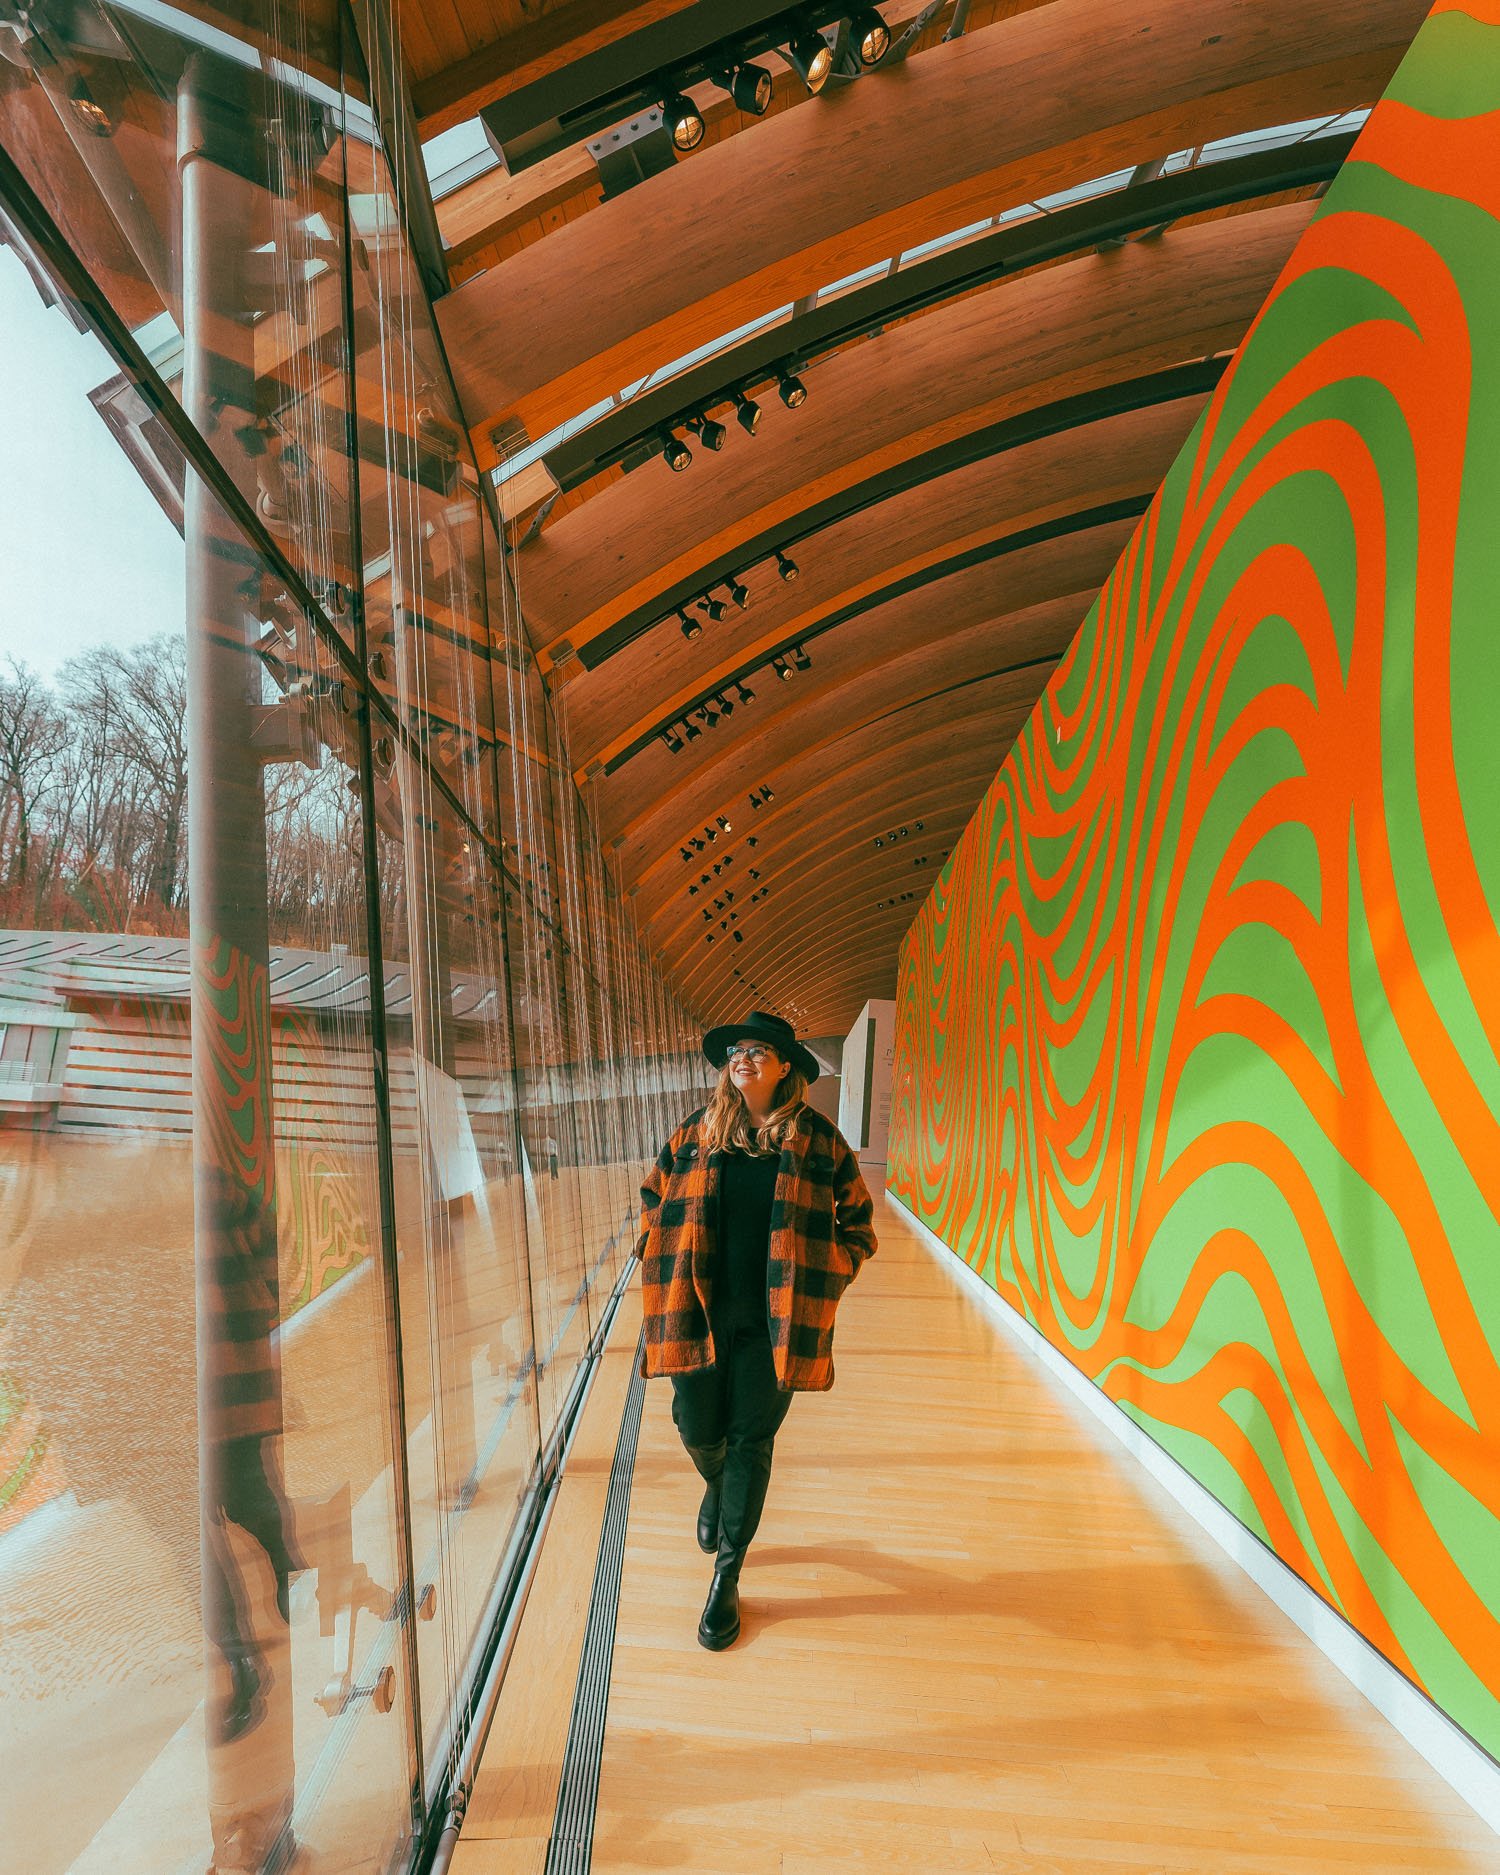 The Best Things to Do in Northwest Arkansas // Explore American Art and Architecture at Crystal Bridges Museum in Bentonville, AR